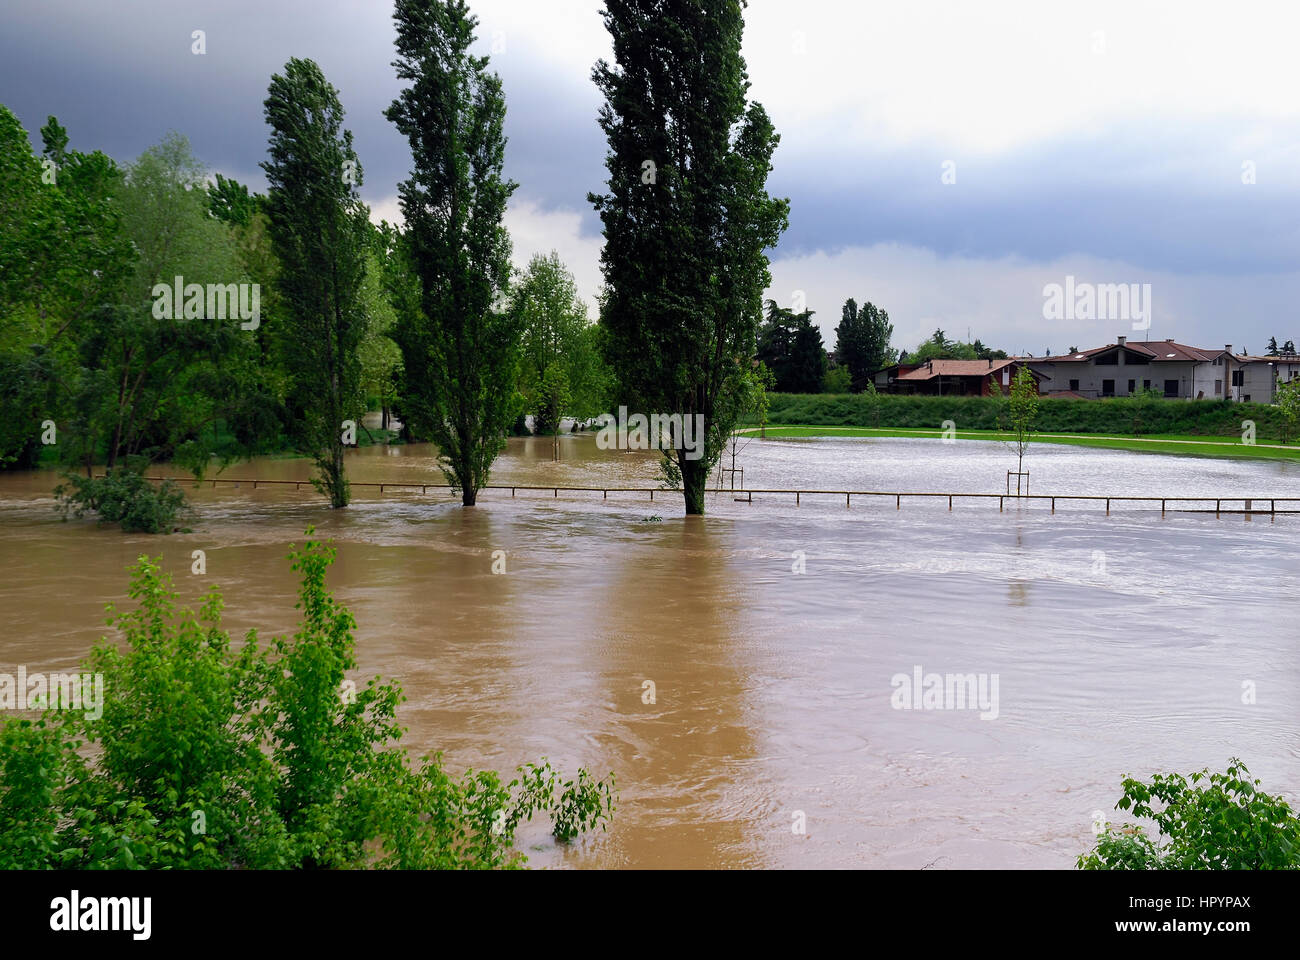 Bad weather in Veneto, Italy.  Heavy rains have flooded the fields causing extensive damage to agriculture. Stock Photo